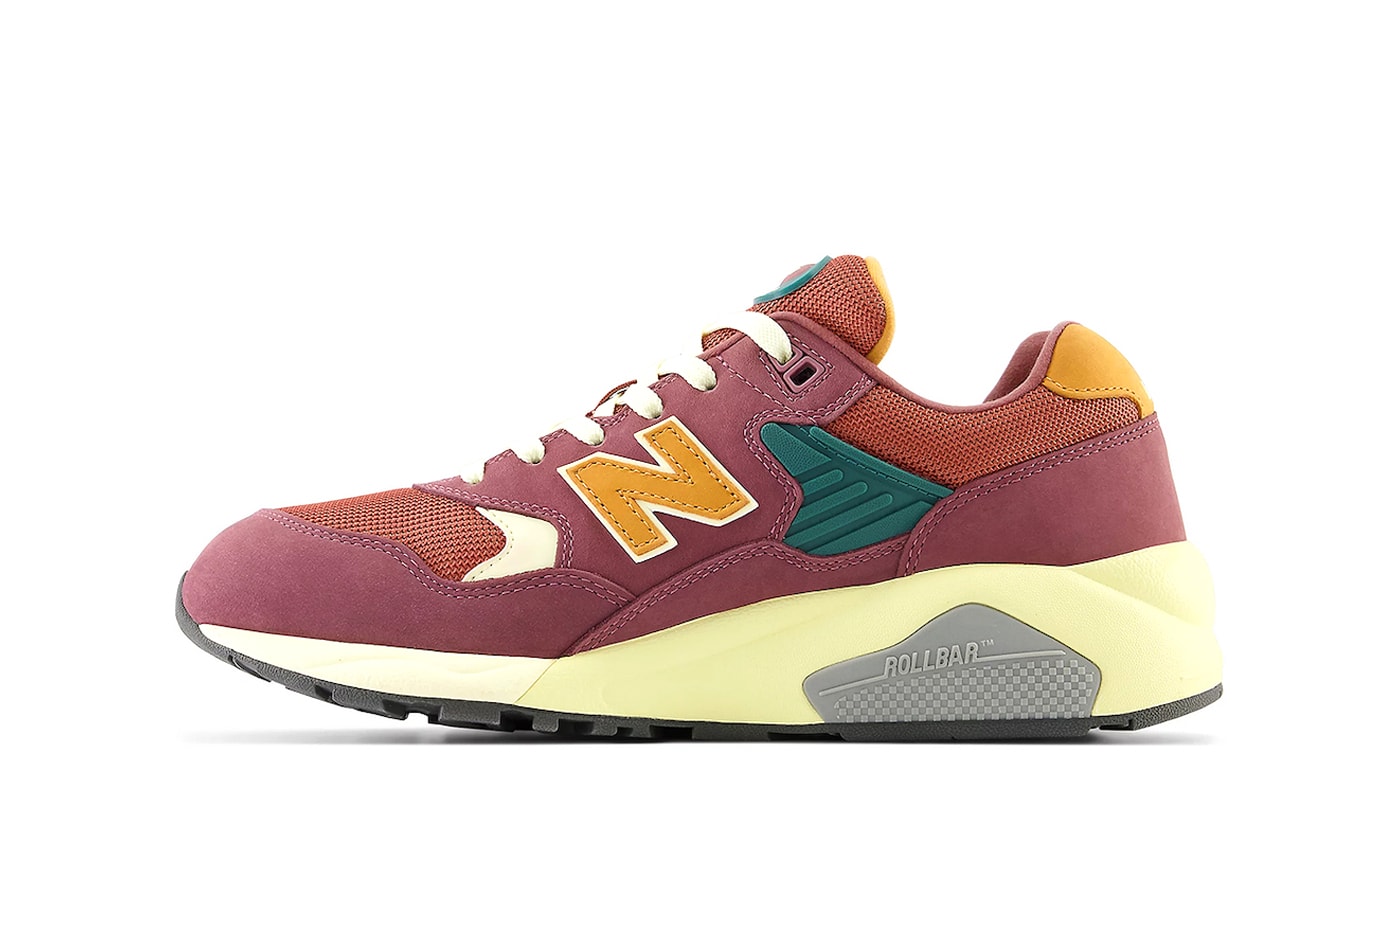 New Balance 580 Has Surfaced in "Washed Burgundy" MT580KDA Washed Burgundy/Mahogany-Vintage Teal nb sneakers everyday